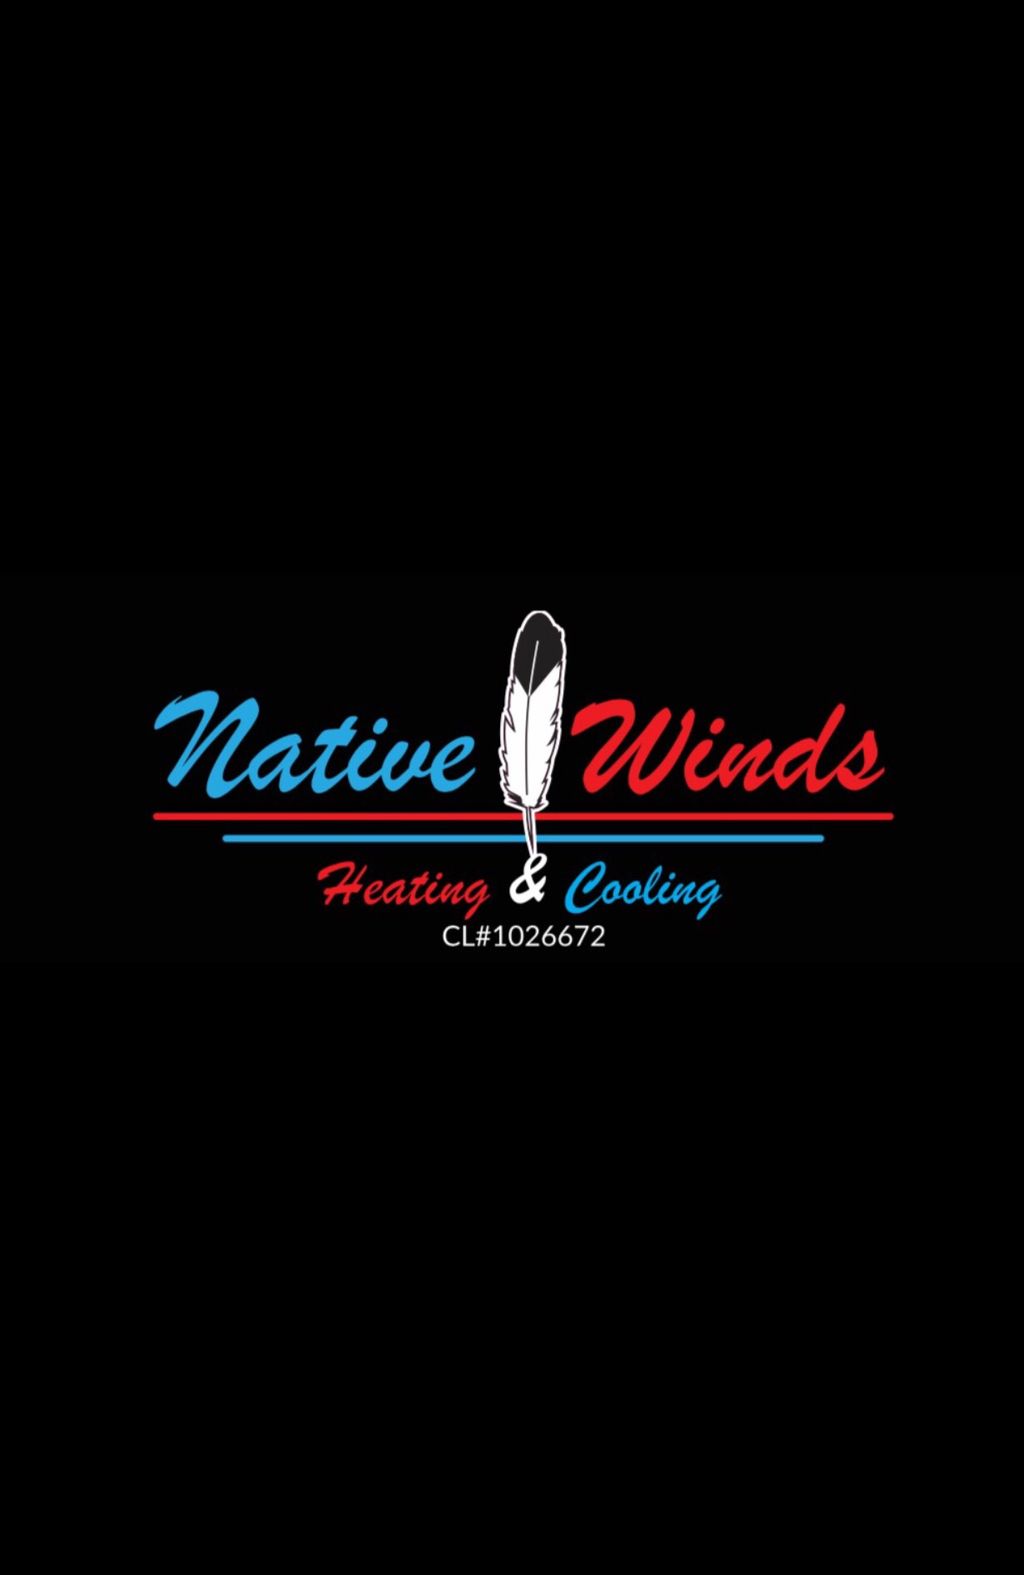 Native Winds Heating & Cooling